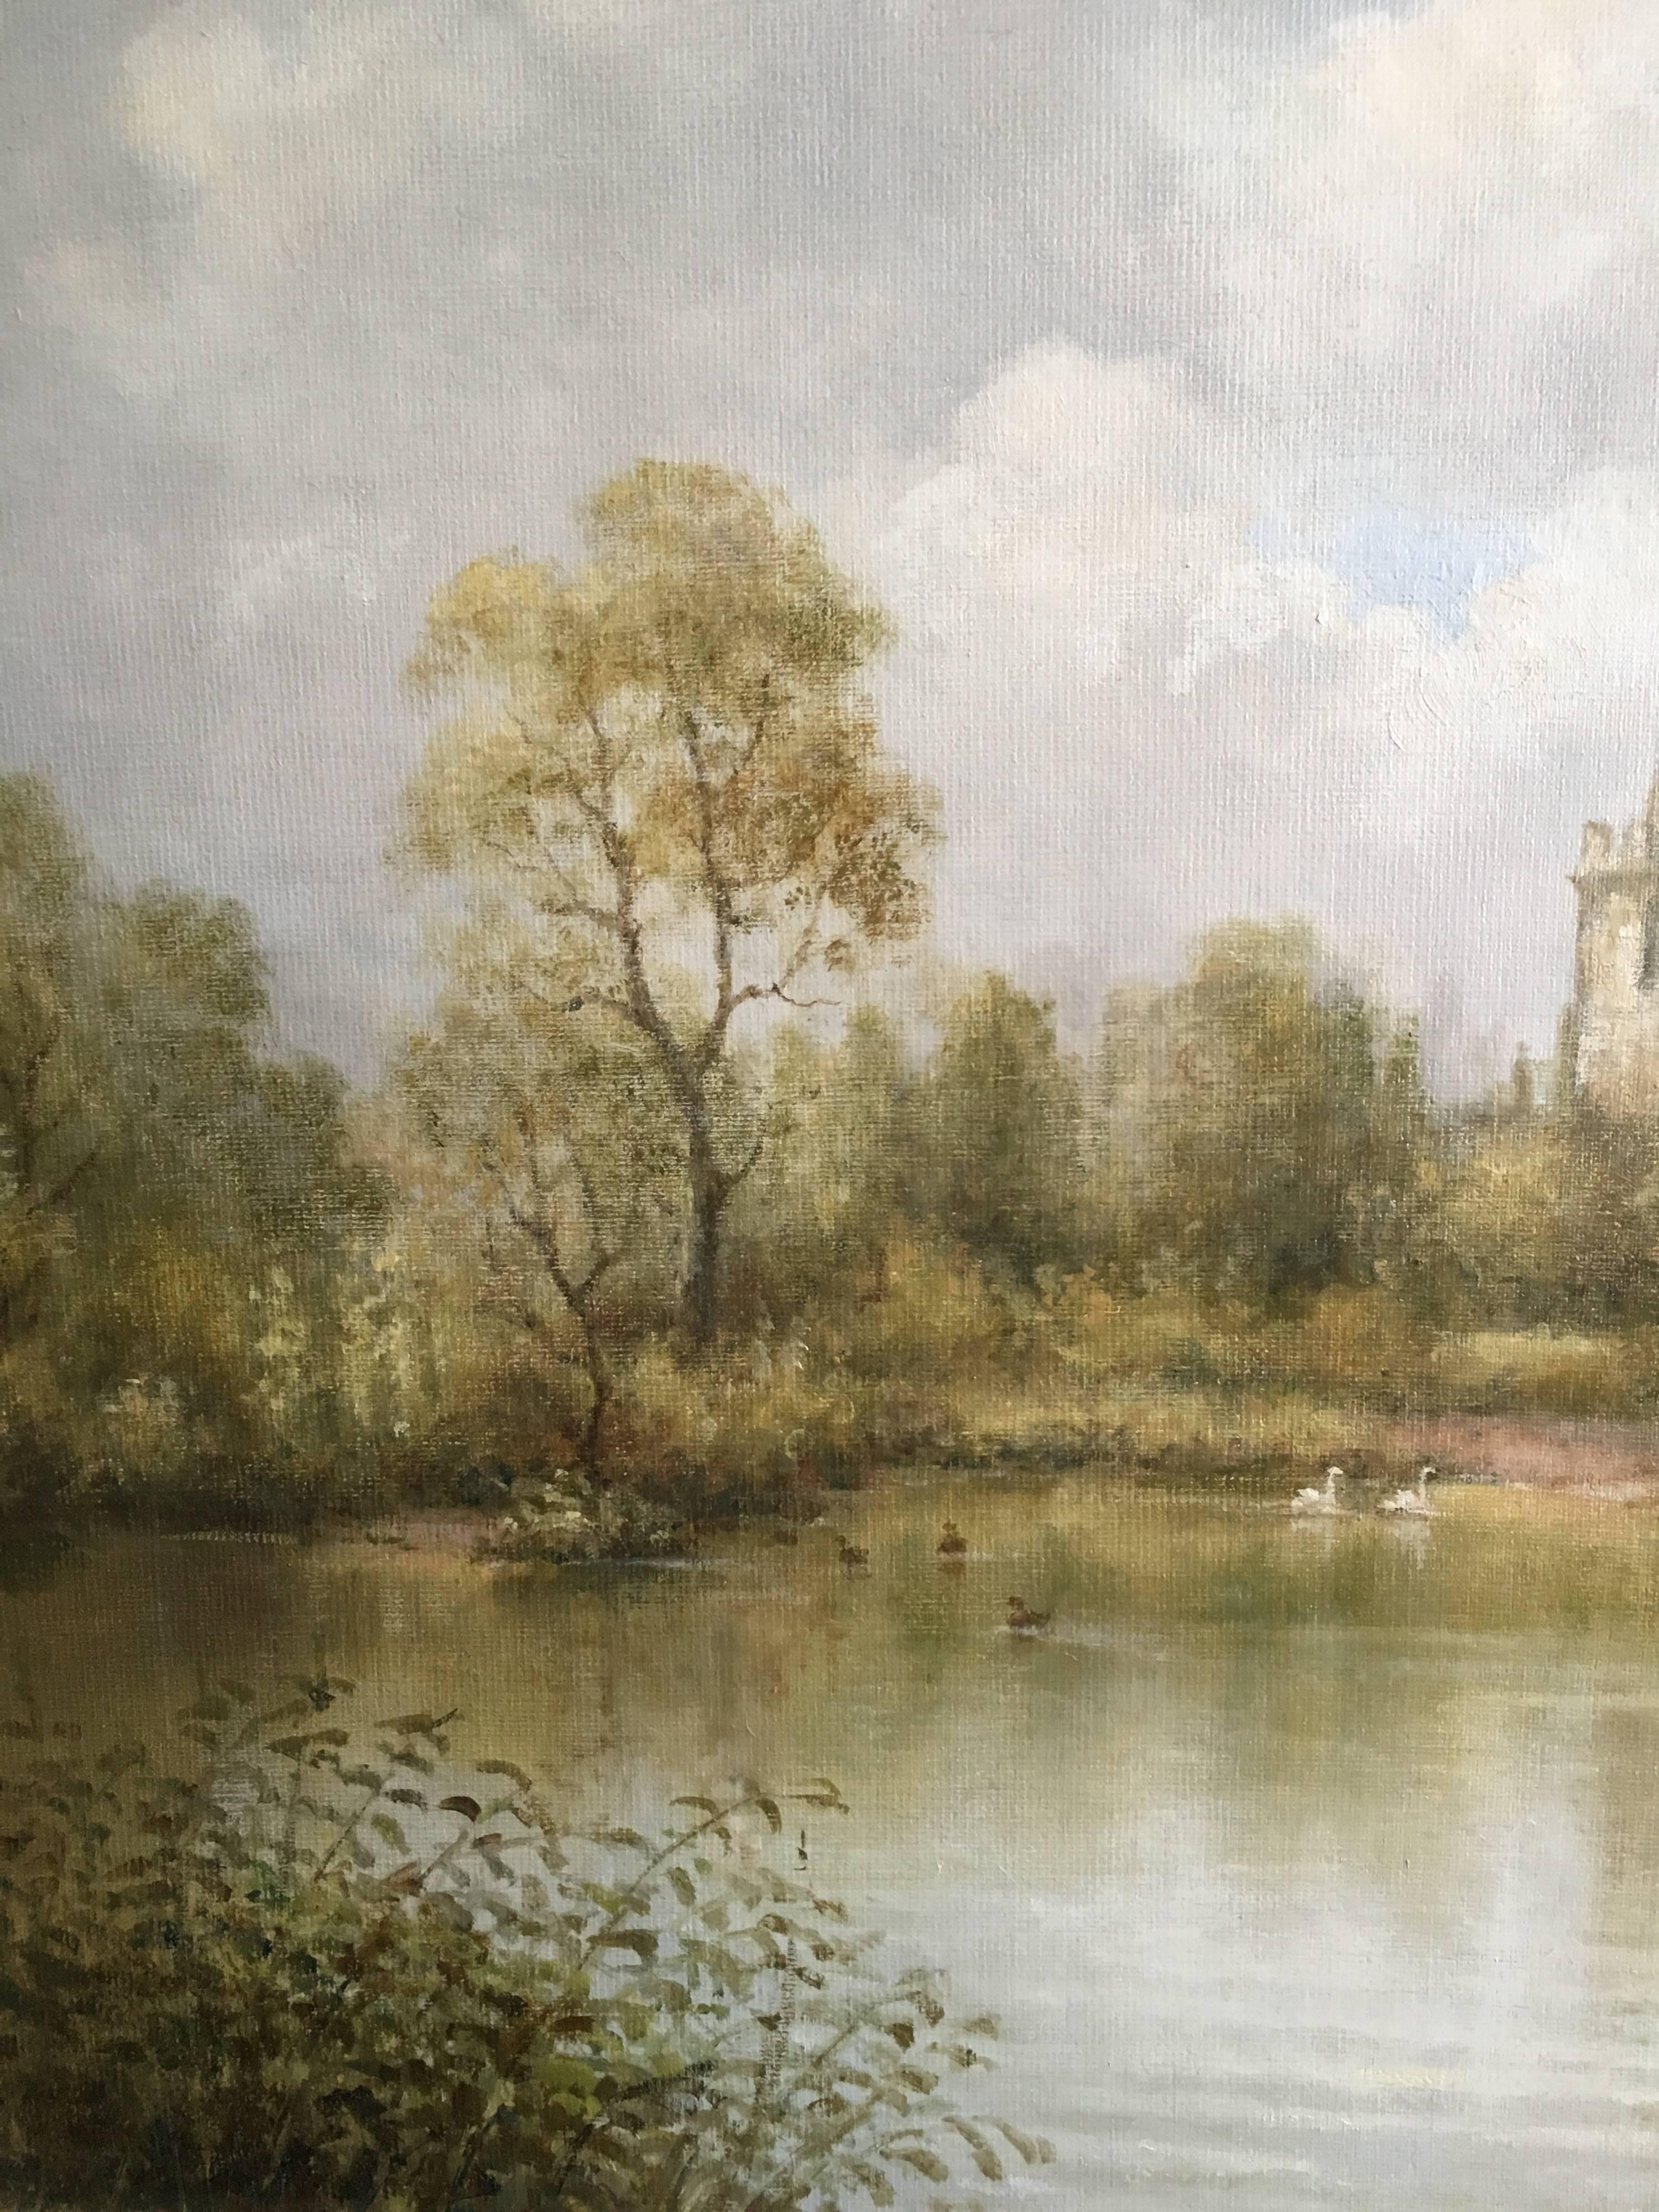 St. Mary's Church, Attenborough, British Oil Painting
By British artist C.Desborough, 20th Century
Signed and dated '1982' by the artist on the lower right hand corner
Oil painting on board, framed
Frame size: 22.75 x 32.75 inches

Large oil